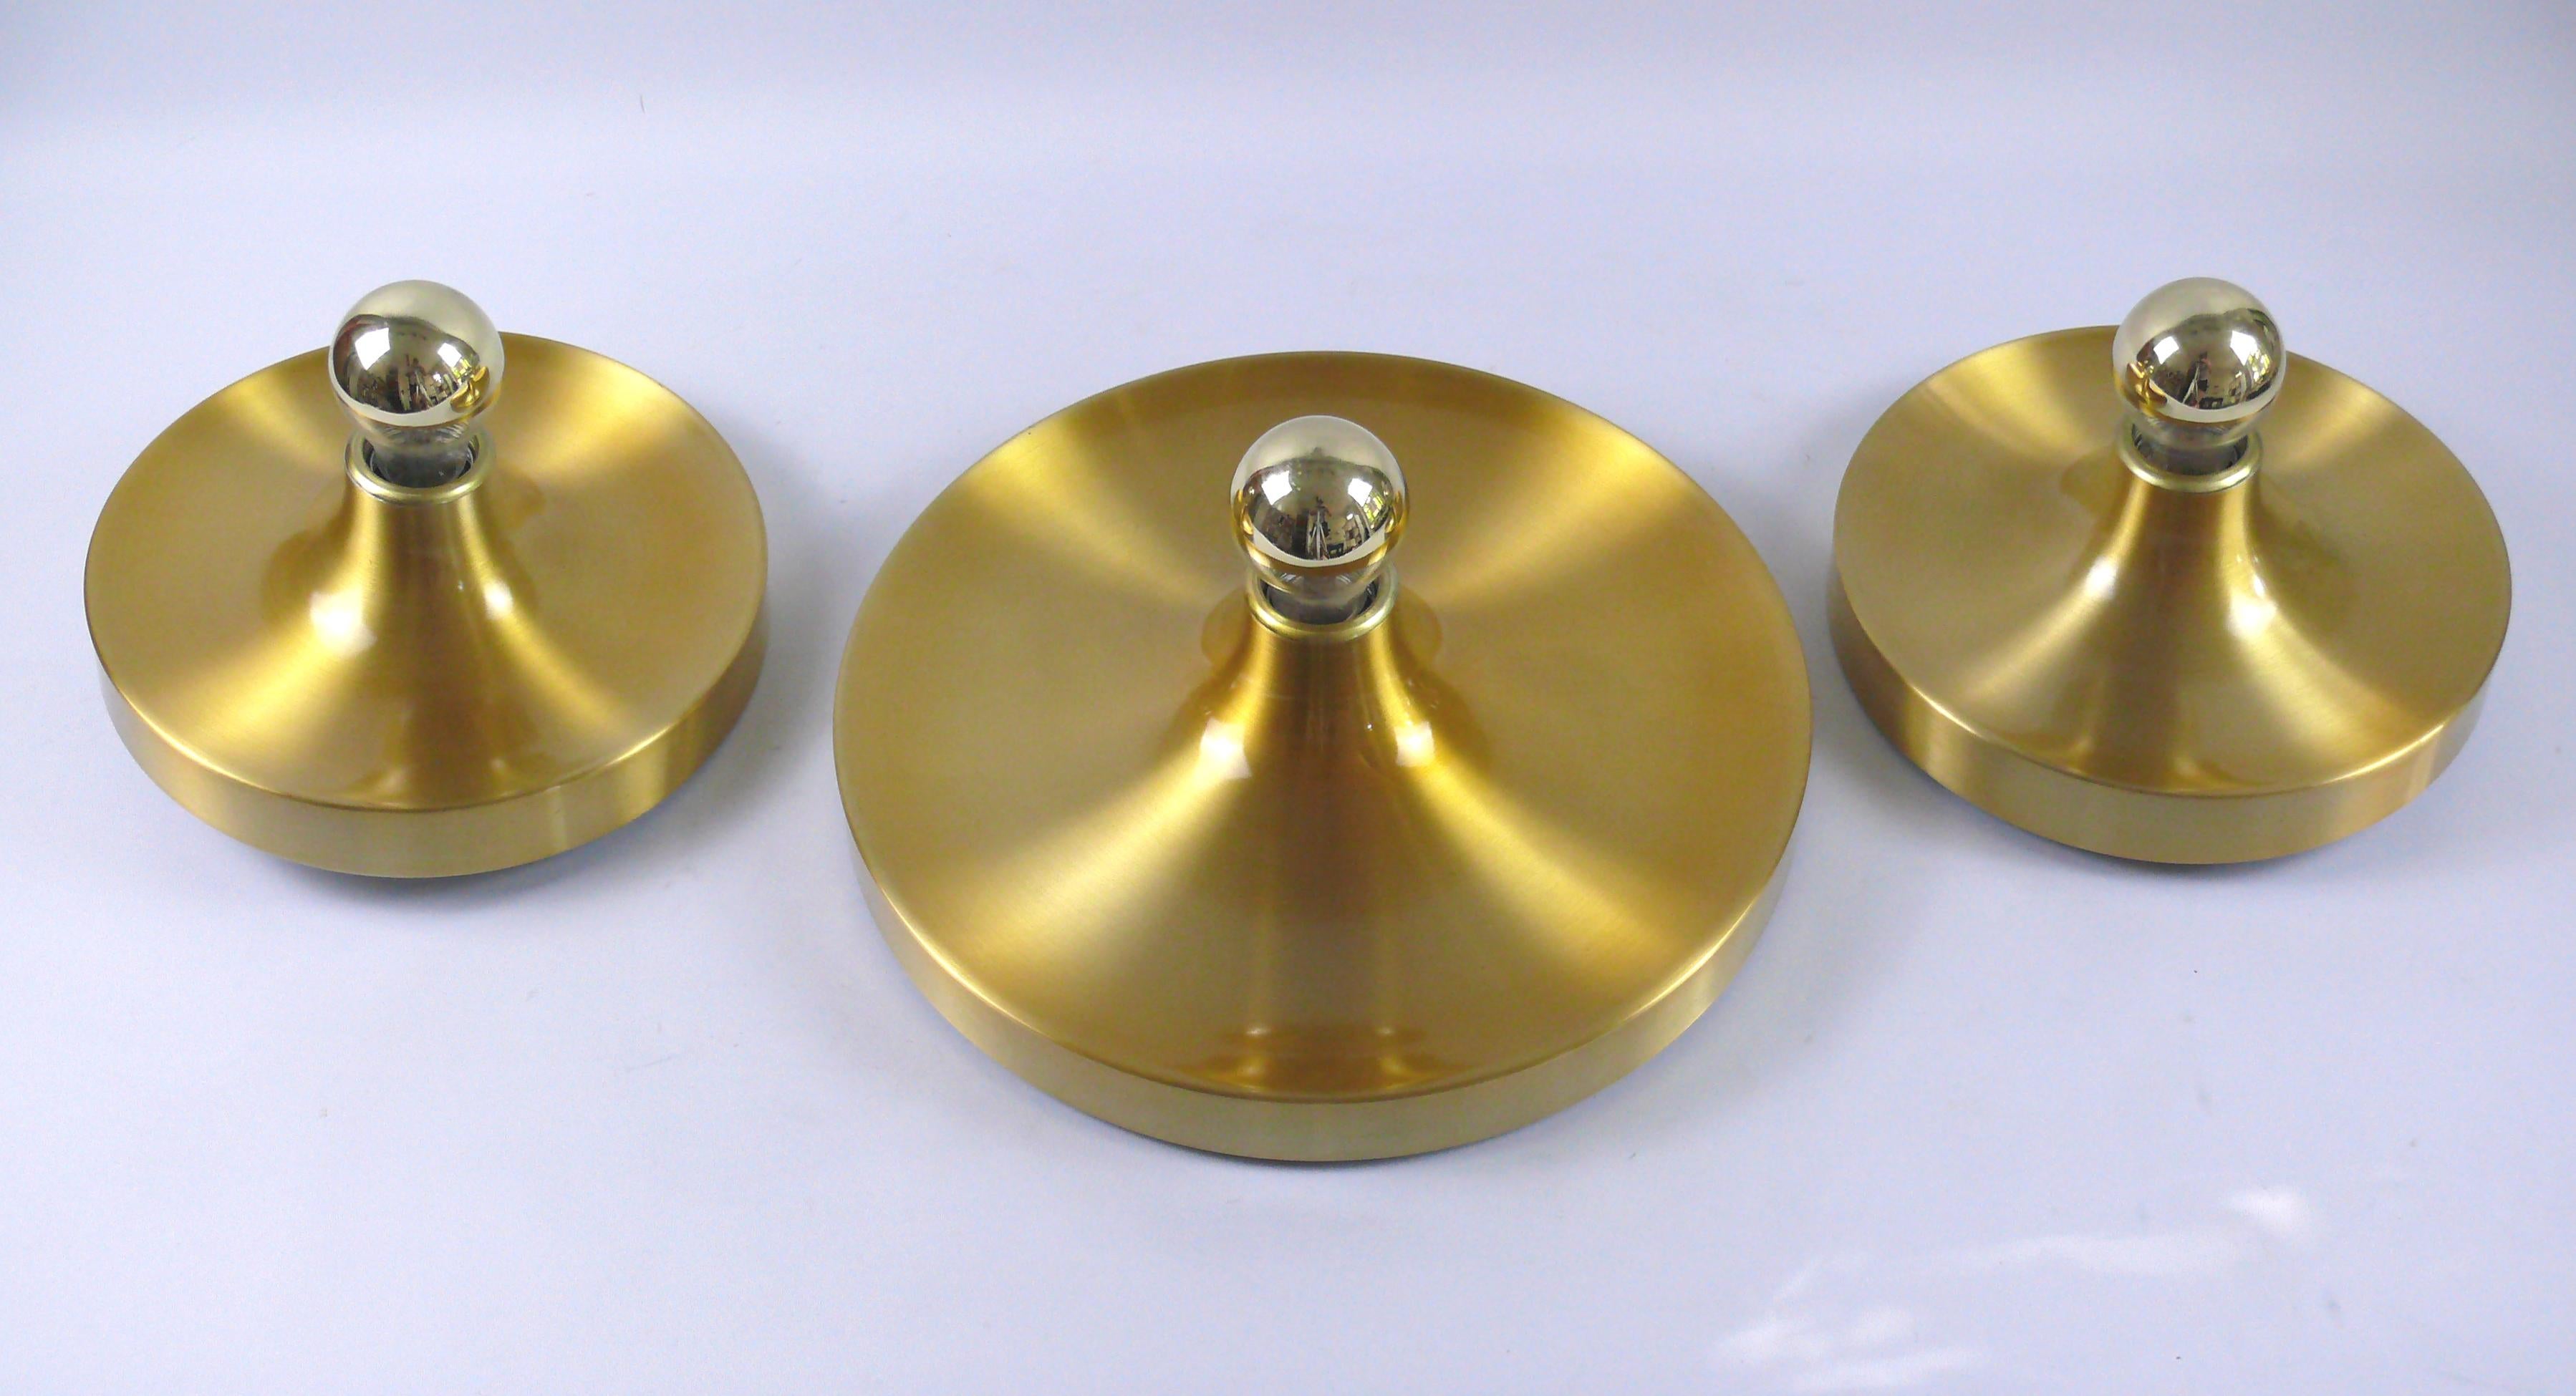 Set of 3 x original disc lights by Honsel, Germany, 1960s. 2 pieces diameter 25 cm, 1 piece diameter 35 cm.
The lights are made of brushed aluminum and coated in gold. The lights can be attached to both the ceiling and the wall. They have an E 27